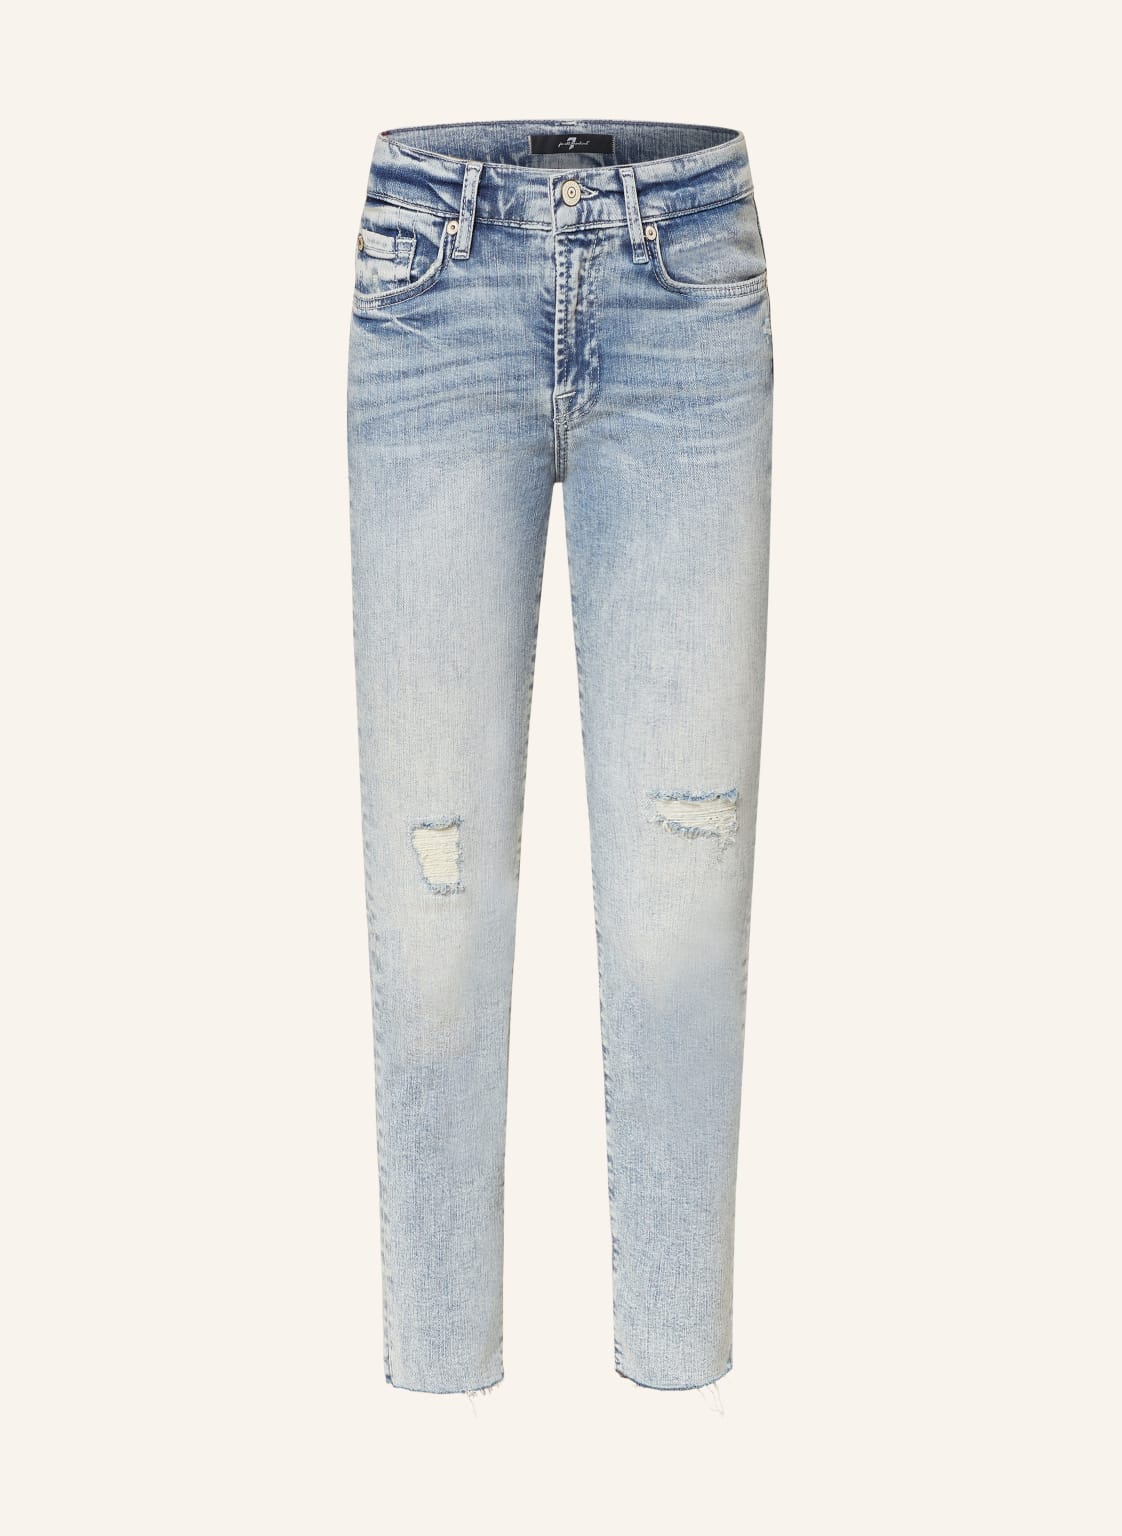 7 For All Mankind 7/8-Skinny Jeans Roxanne blau von 7 For All Mankind